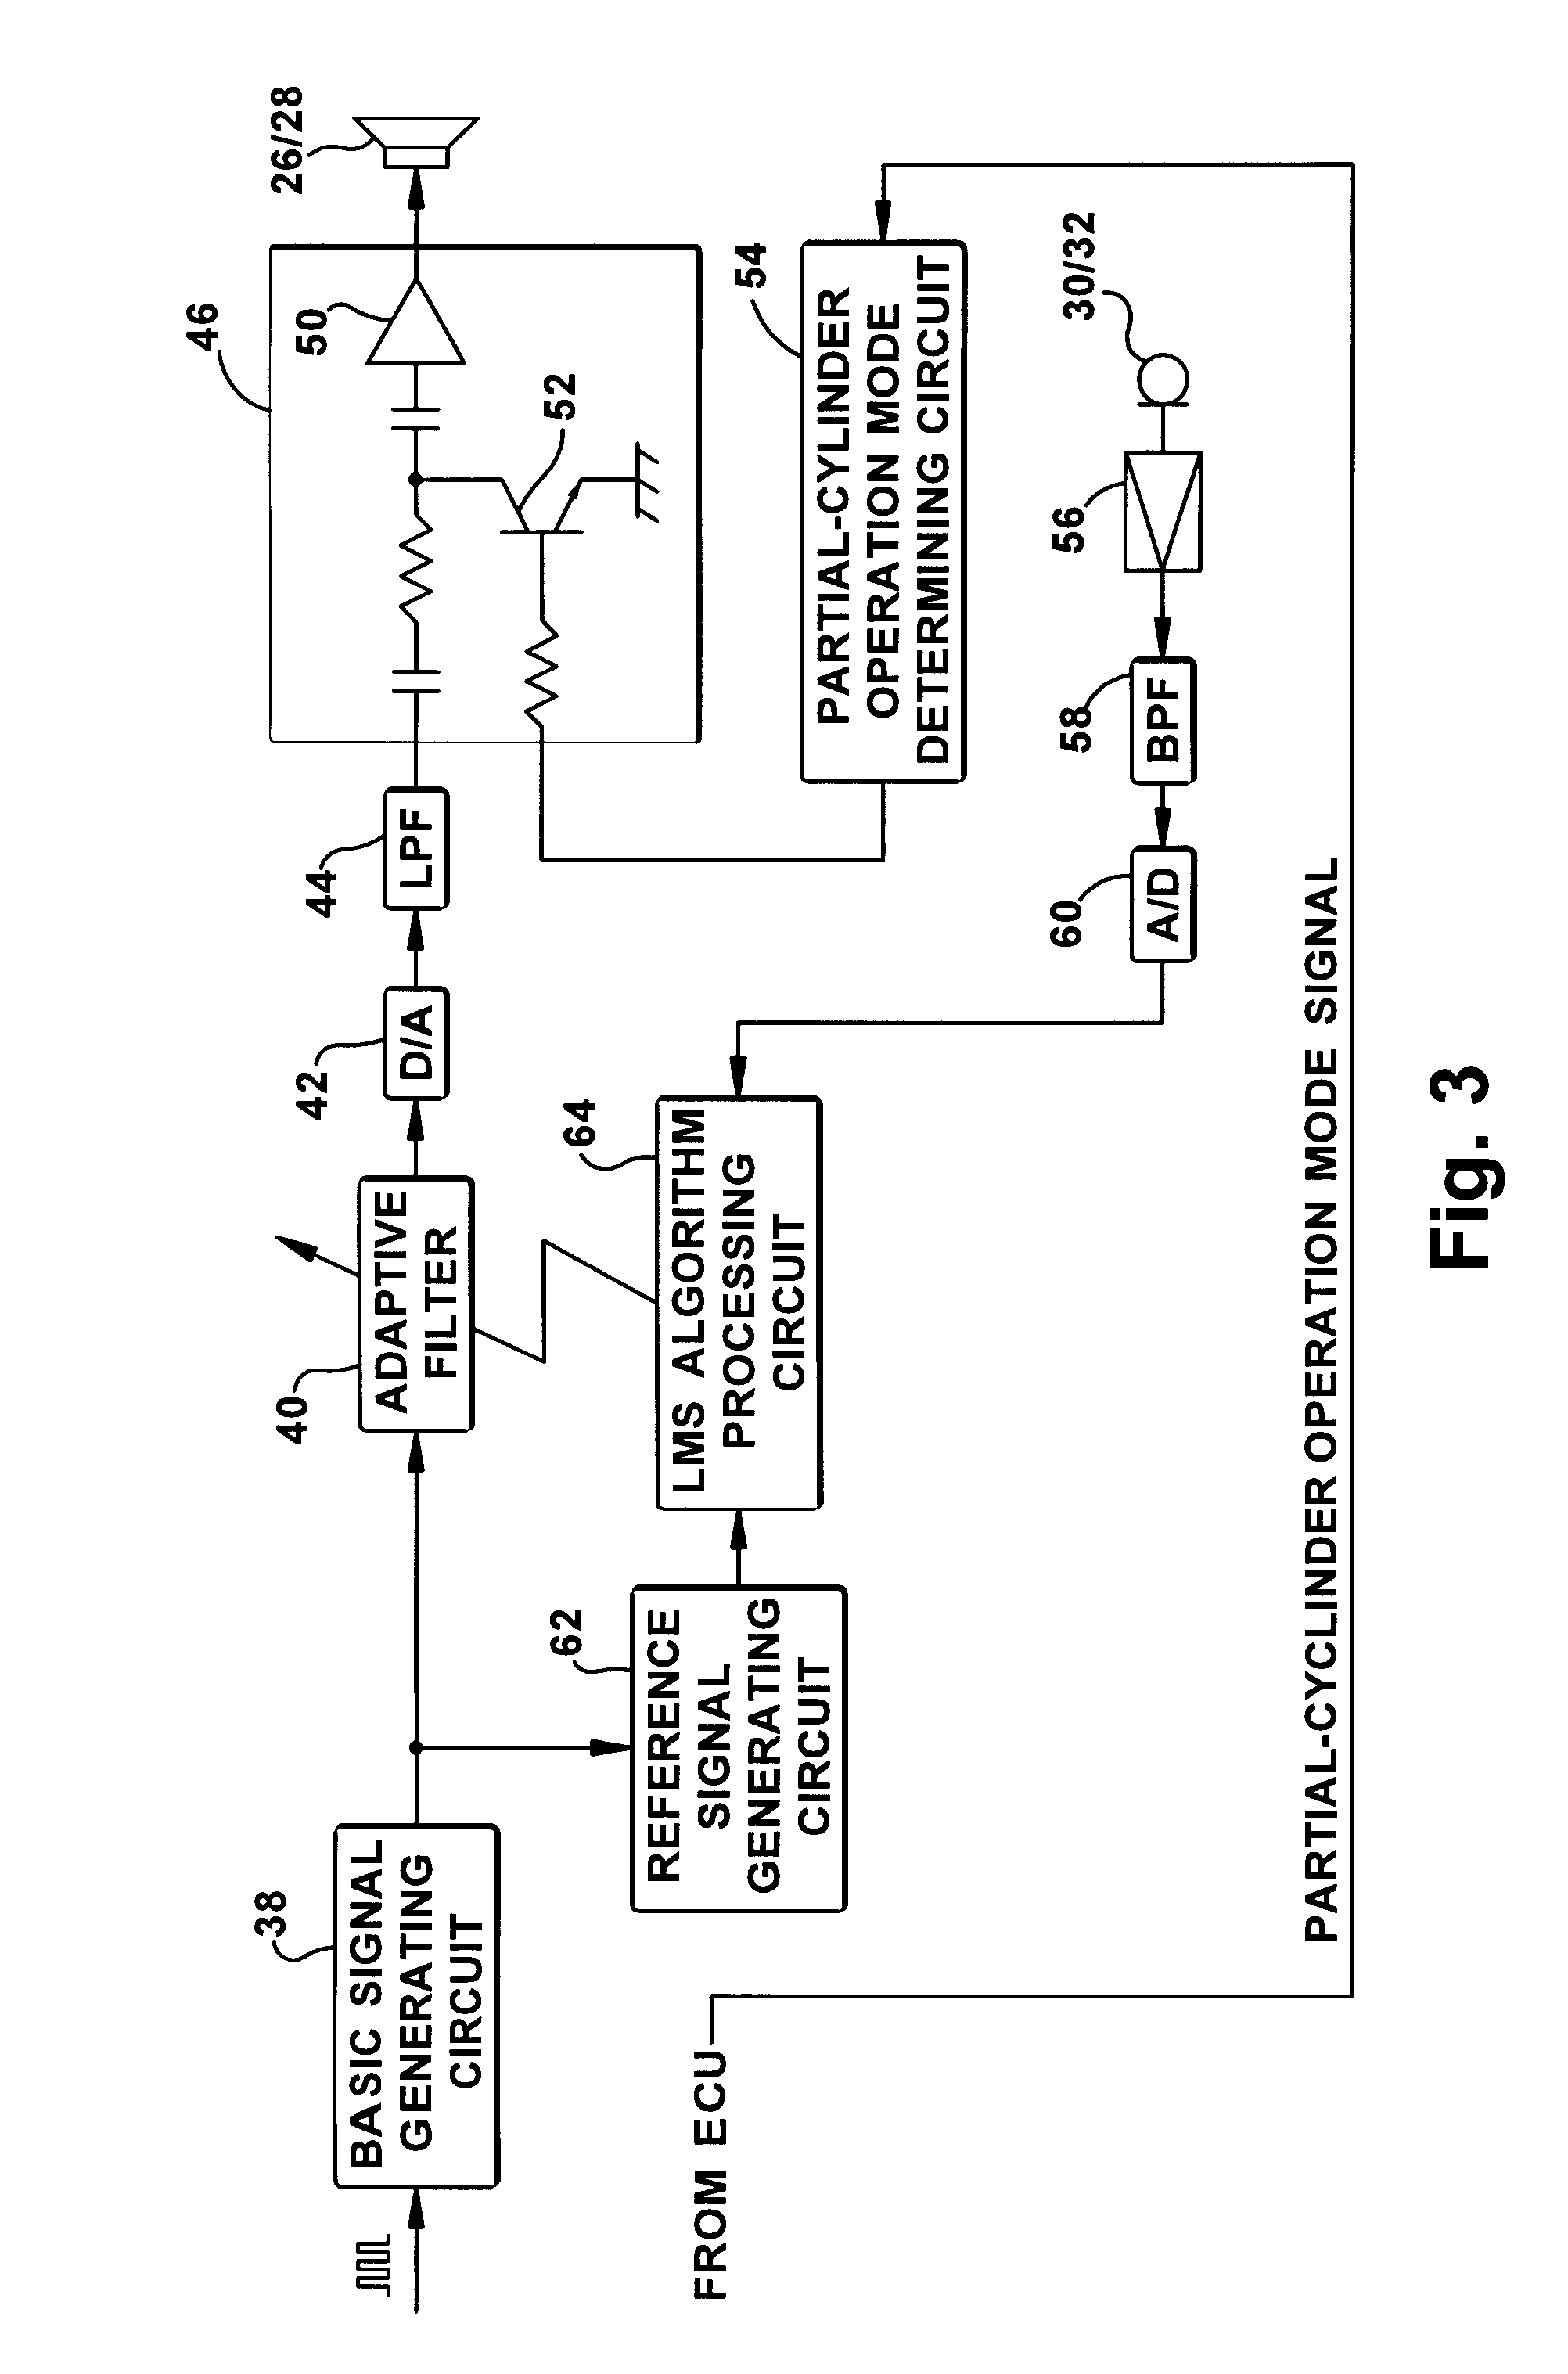 Method for reducing noise in a vehicle cabin